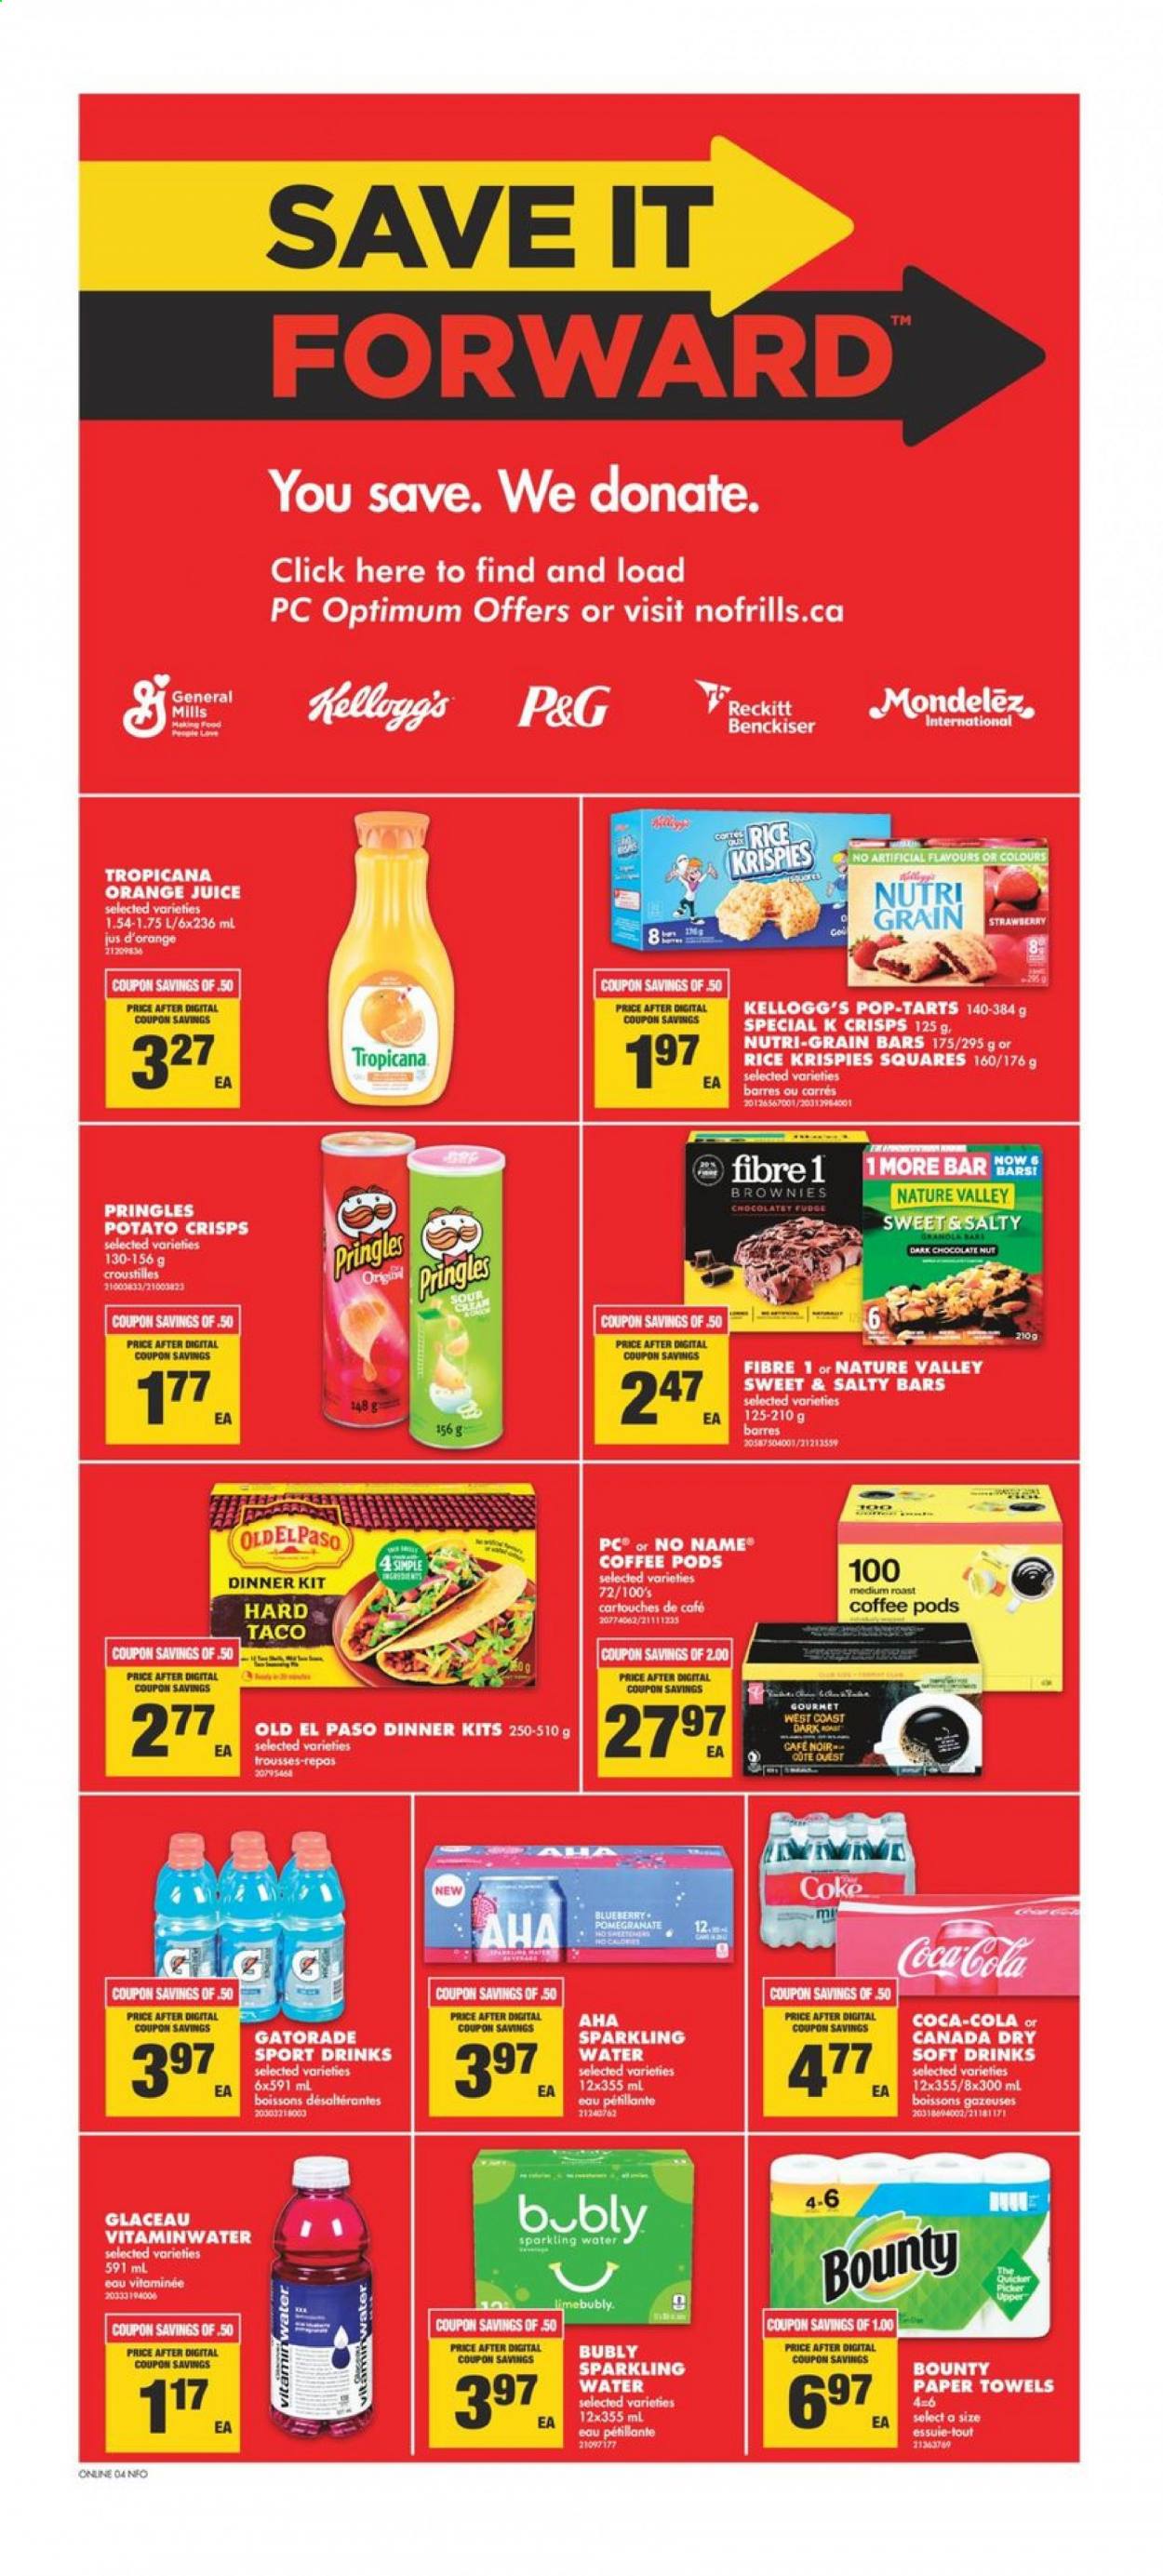 thumbnail - No Frills Flyer - May 20, 2021 - May 26, 2021 - Sales products - Old El Paso, brownies, No Name, dinner kit, sour cream, fudge, chocolate, Bounty, Kellogg's, dark chocolate, Pop-Tarts, potato crisps, Pringles, Rice Krispies, Nature Valley, Nutri-Grain, Canada Dry, Coca-Cola, orange juice, juice, soft drink, Gatorade, sparkling water, coffee pods, kitchen towels, paper towels, Optimum, granola. Page 9.